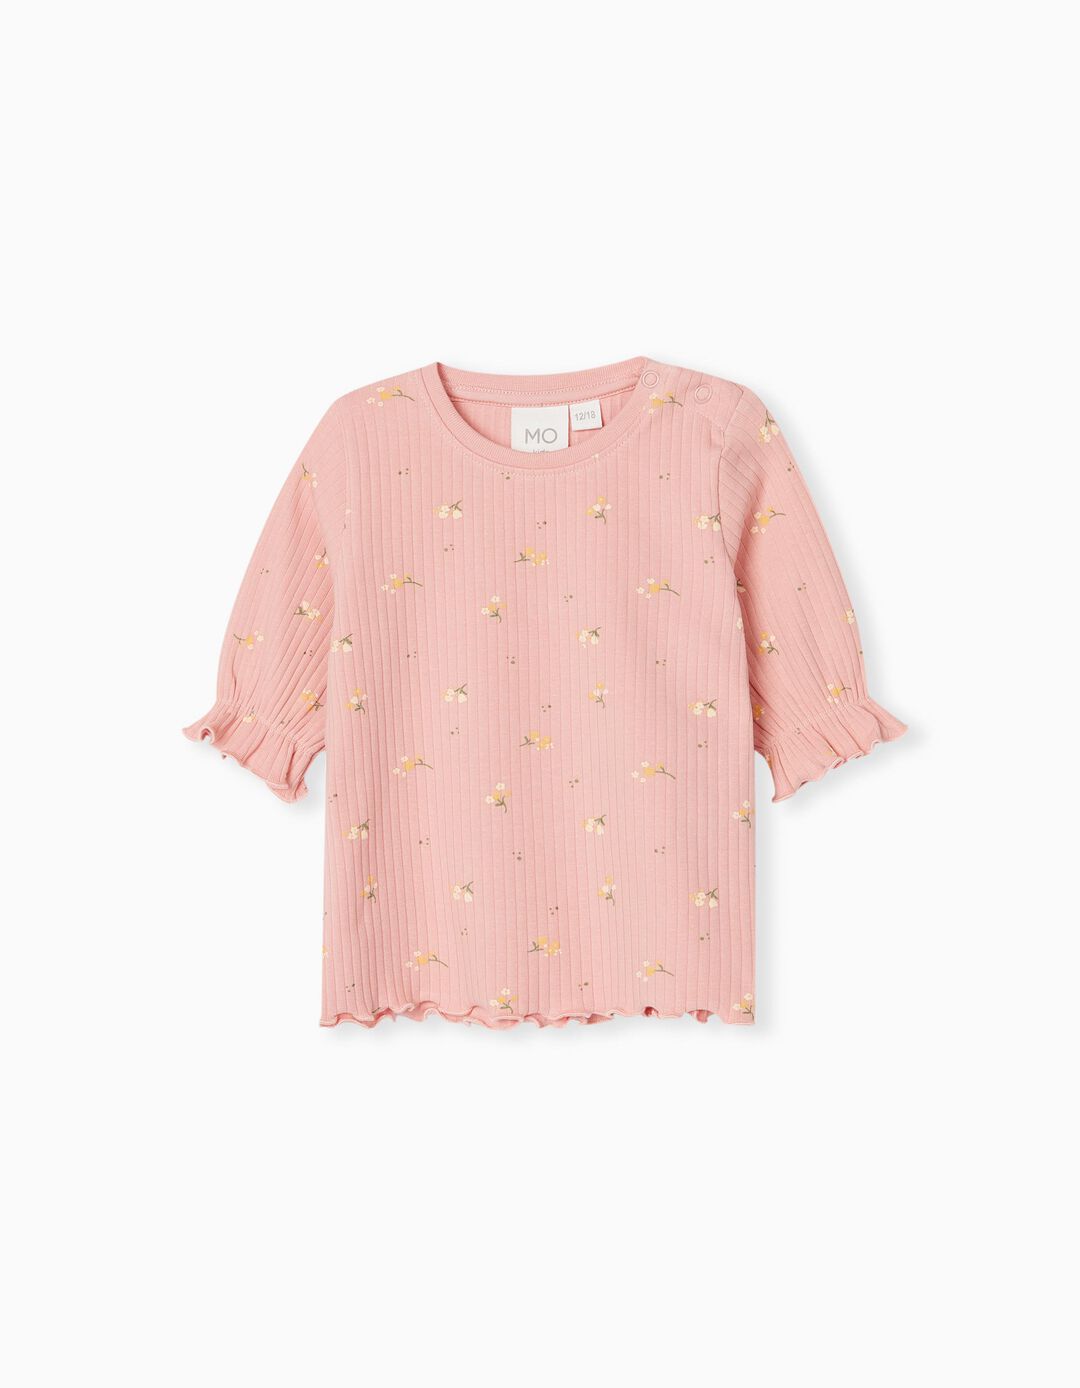 Flowers Ribbed T-shirt, Baby Girls, Light Pink